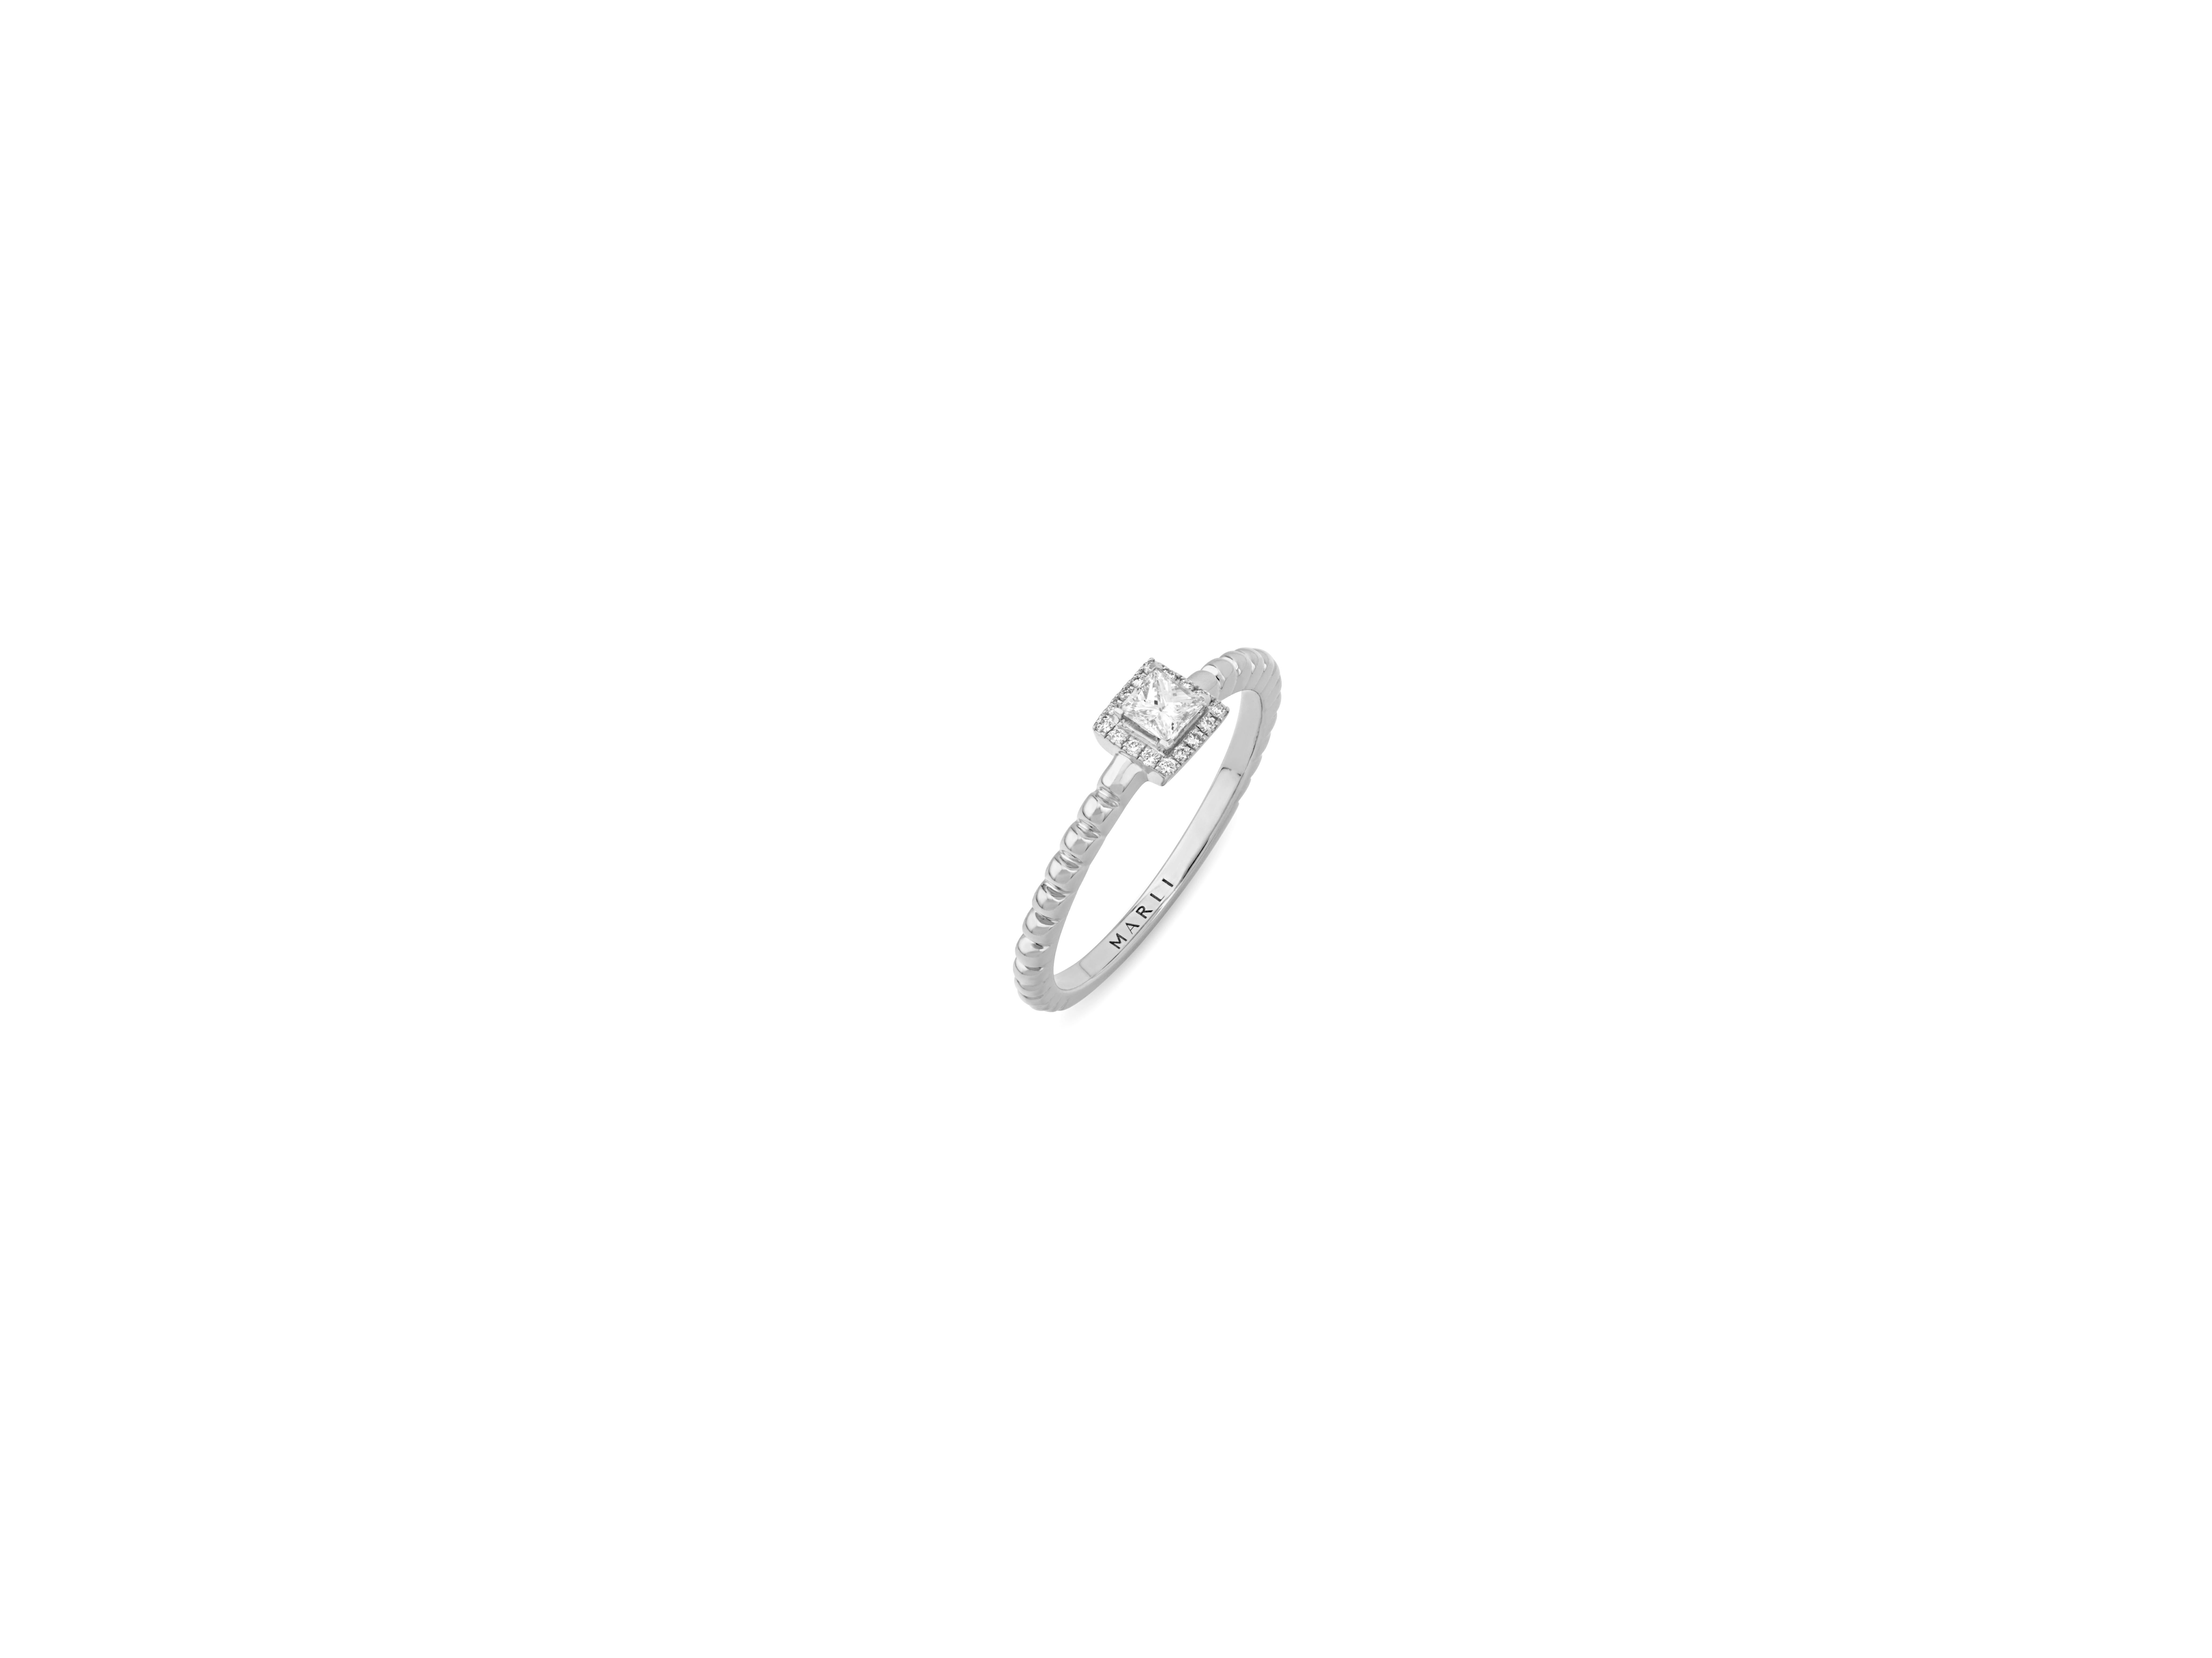 This Rock Ring is the perfect jewelry staple for stacking with other styles or wearing alone for a modern, minimalist look. 